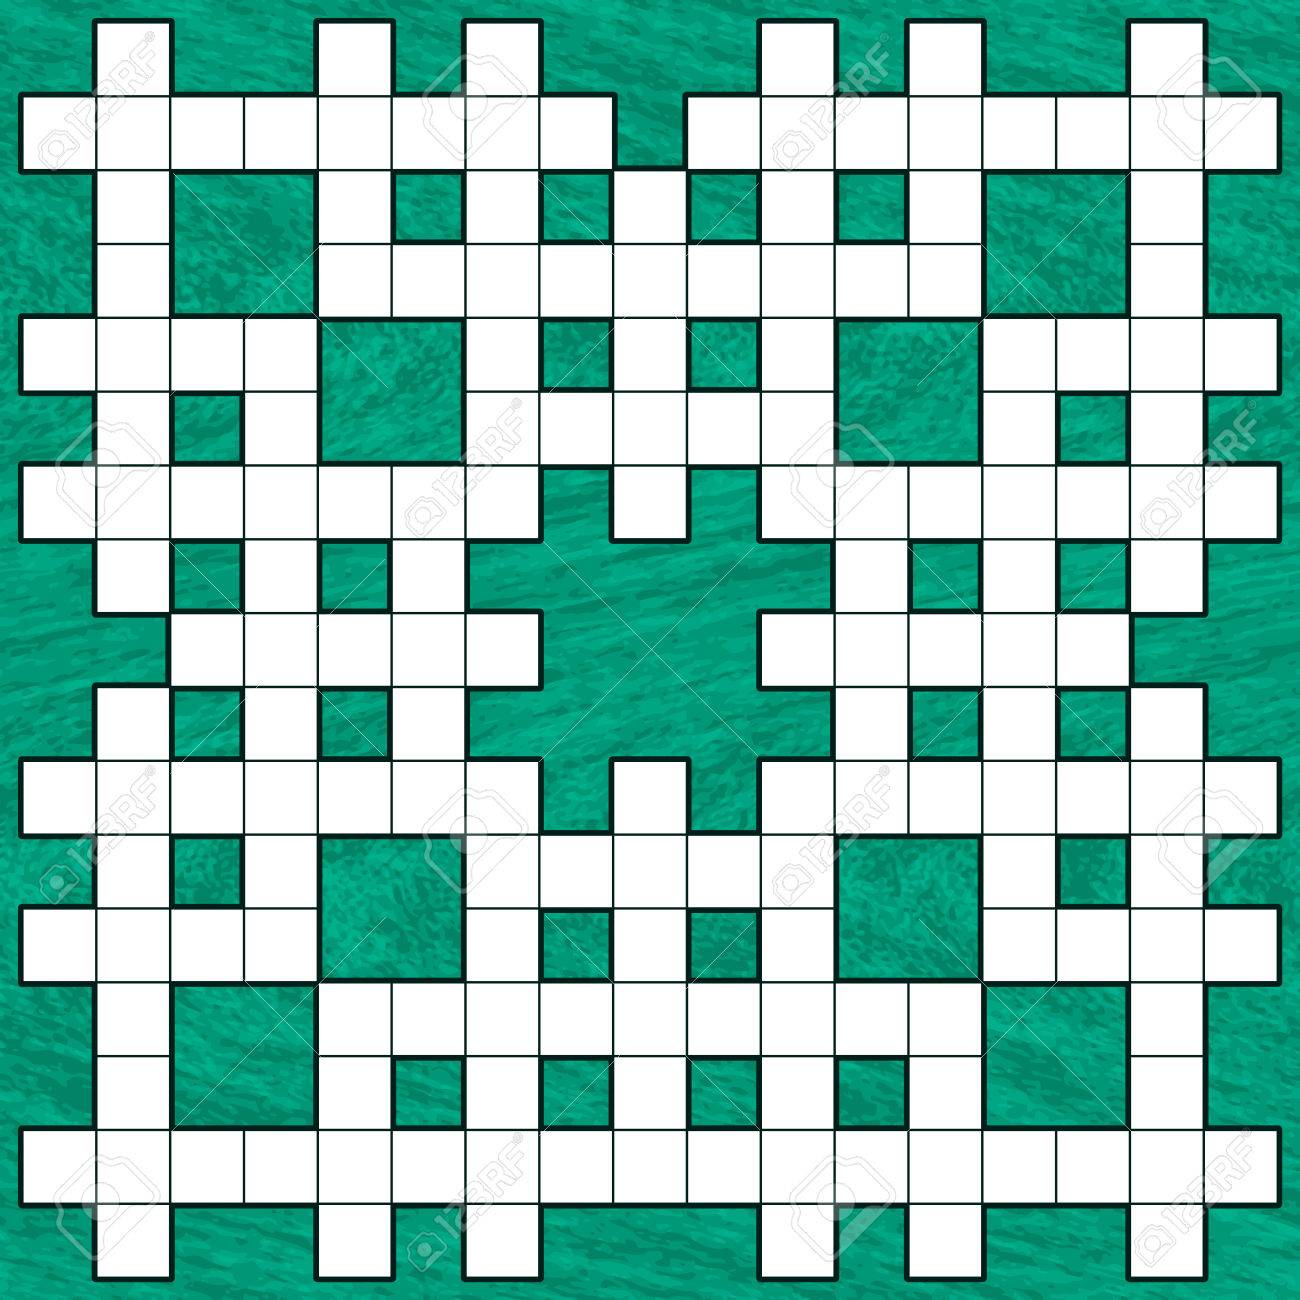 Illustration Of The Crossword Puzzle Pattern On Abstract